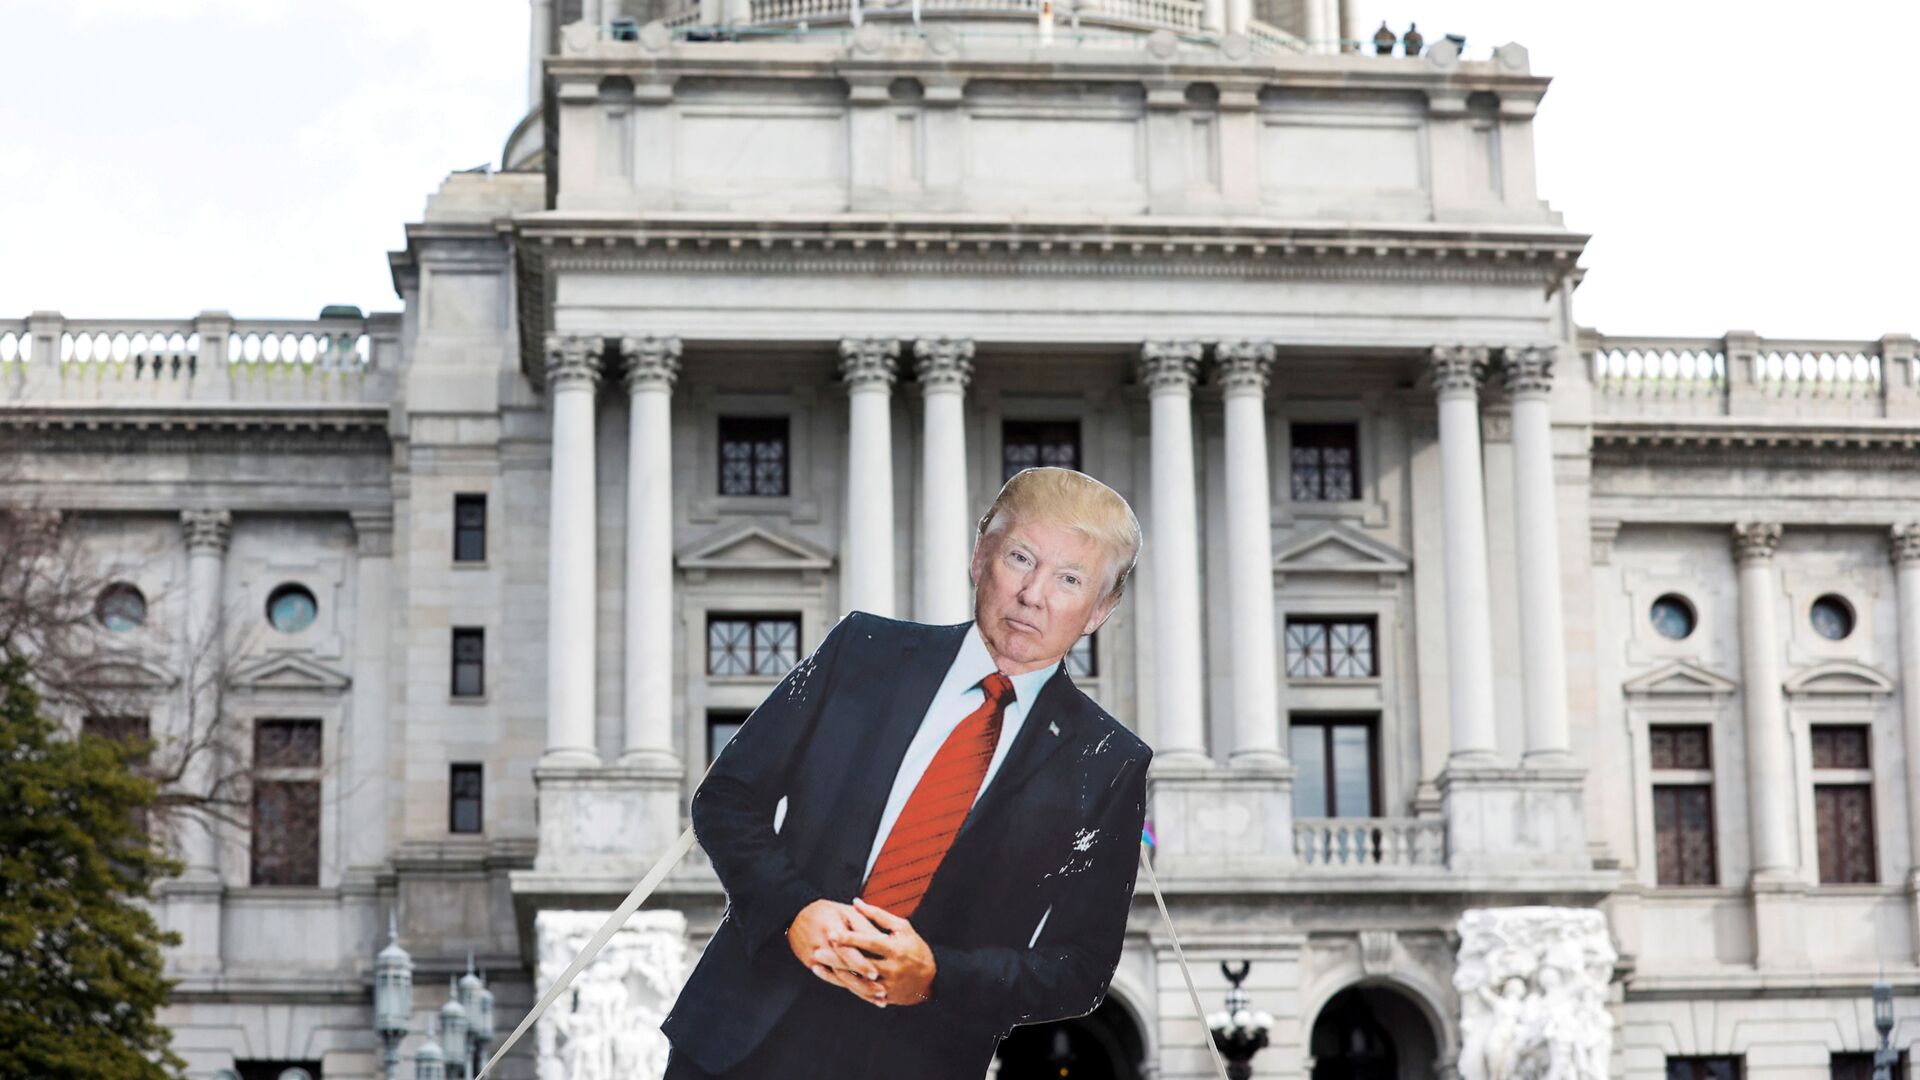 A cardboard cutout depicting U.S. President Donald Trump is seen in front of Pennsylvania State Capitol, as supporters of him are expected to protest against the election of President-elect Joe Biden, outside the Pennsylvania State Capitol in Harrisburg, Pennsylvania, U.S. January 17, 2021 - Sputnik International, 1920, 02.11.2021